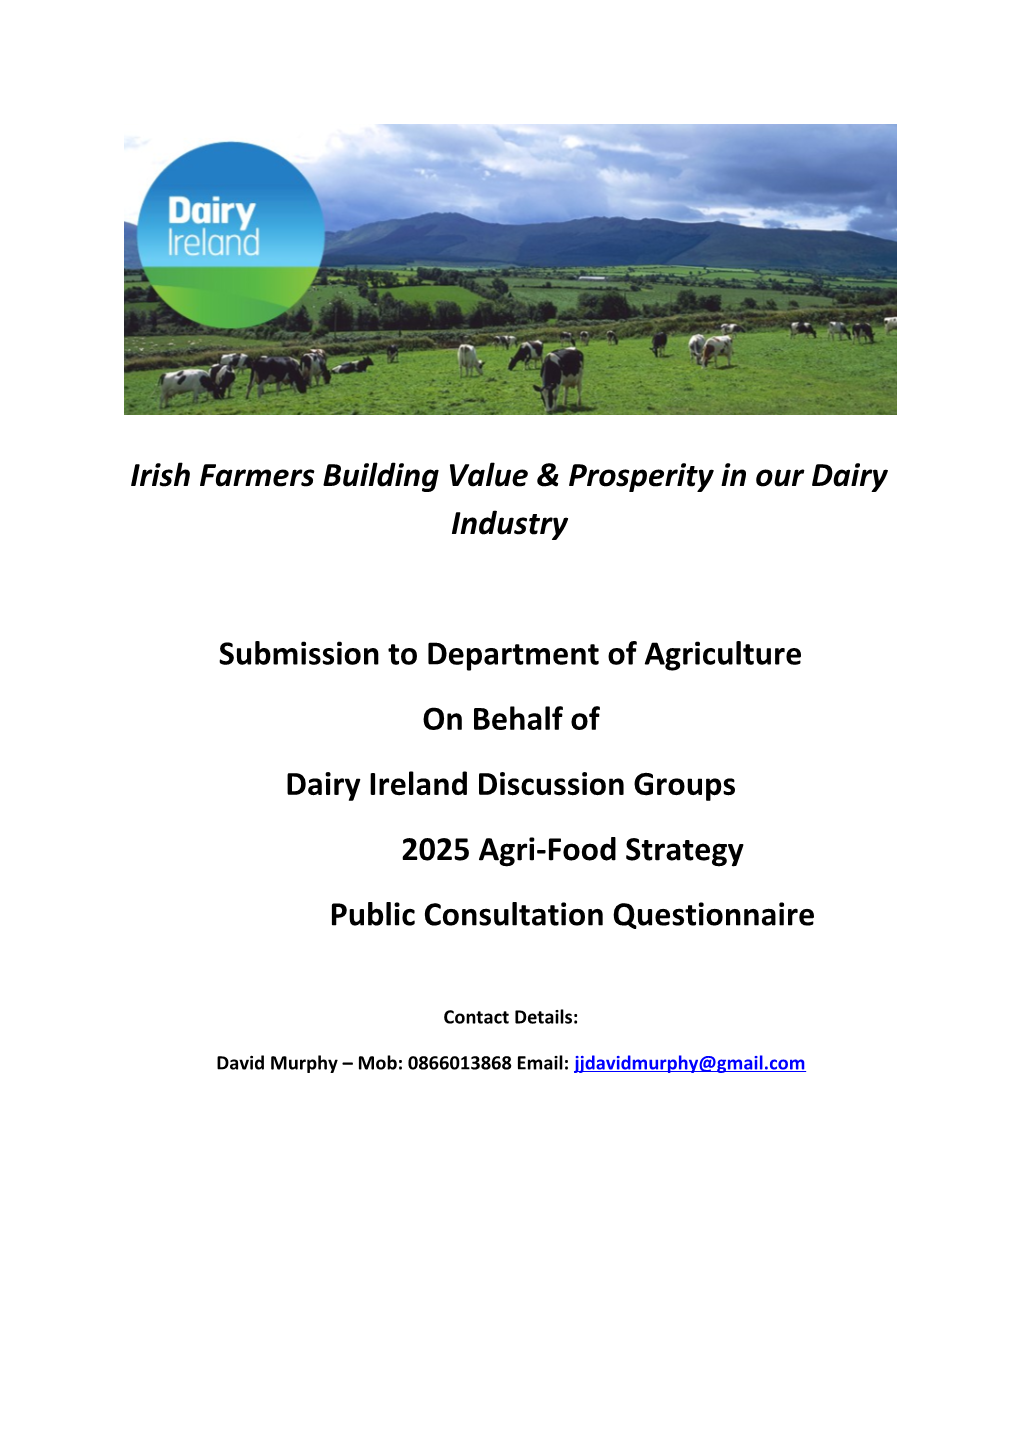 Irish Farmers Building Value & Prosperity in Our Dairy Industry